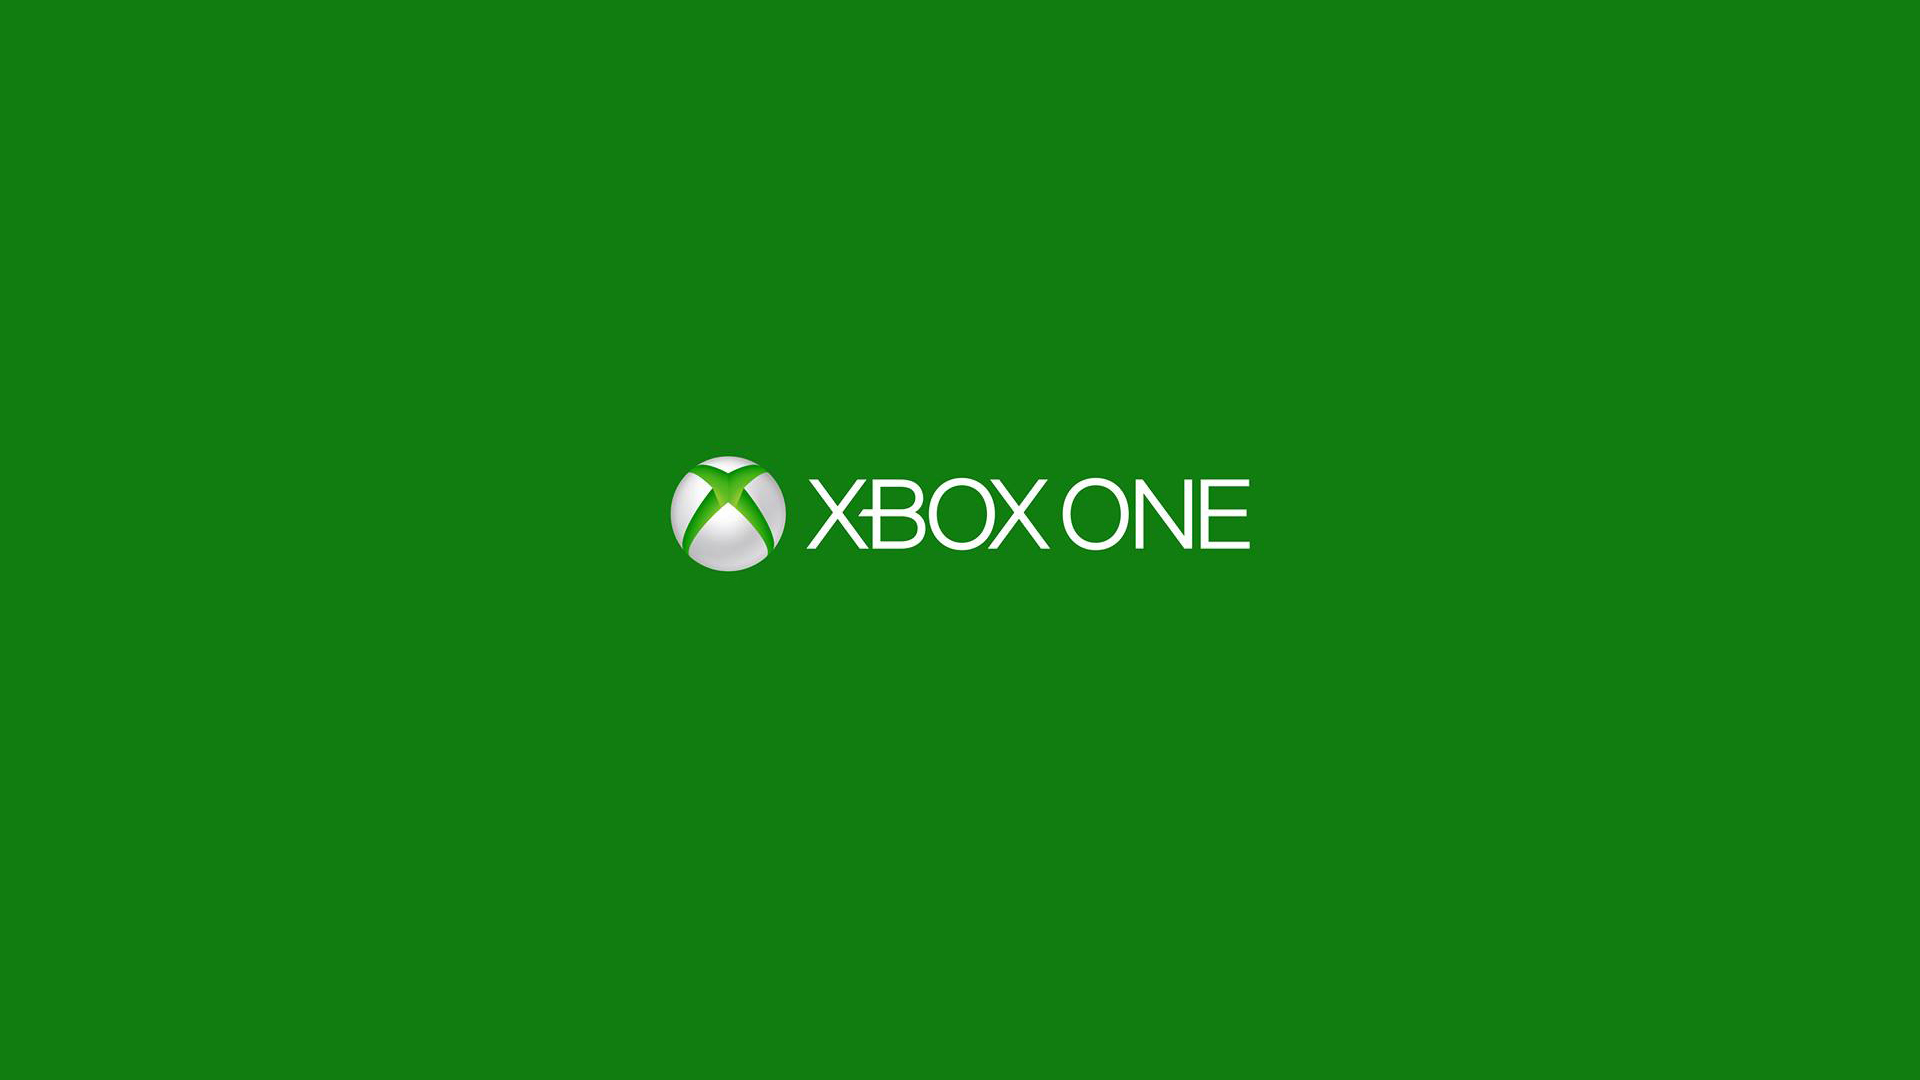 Xbox one desktop wallpaper wallpapers and images   wallpapers